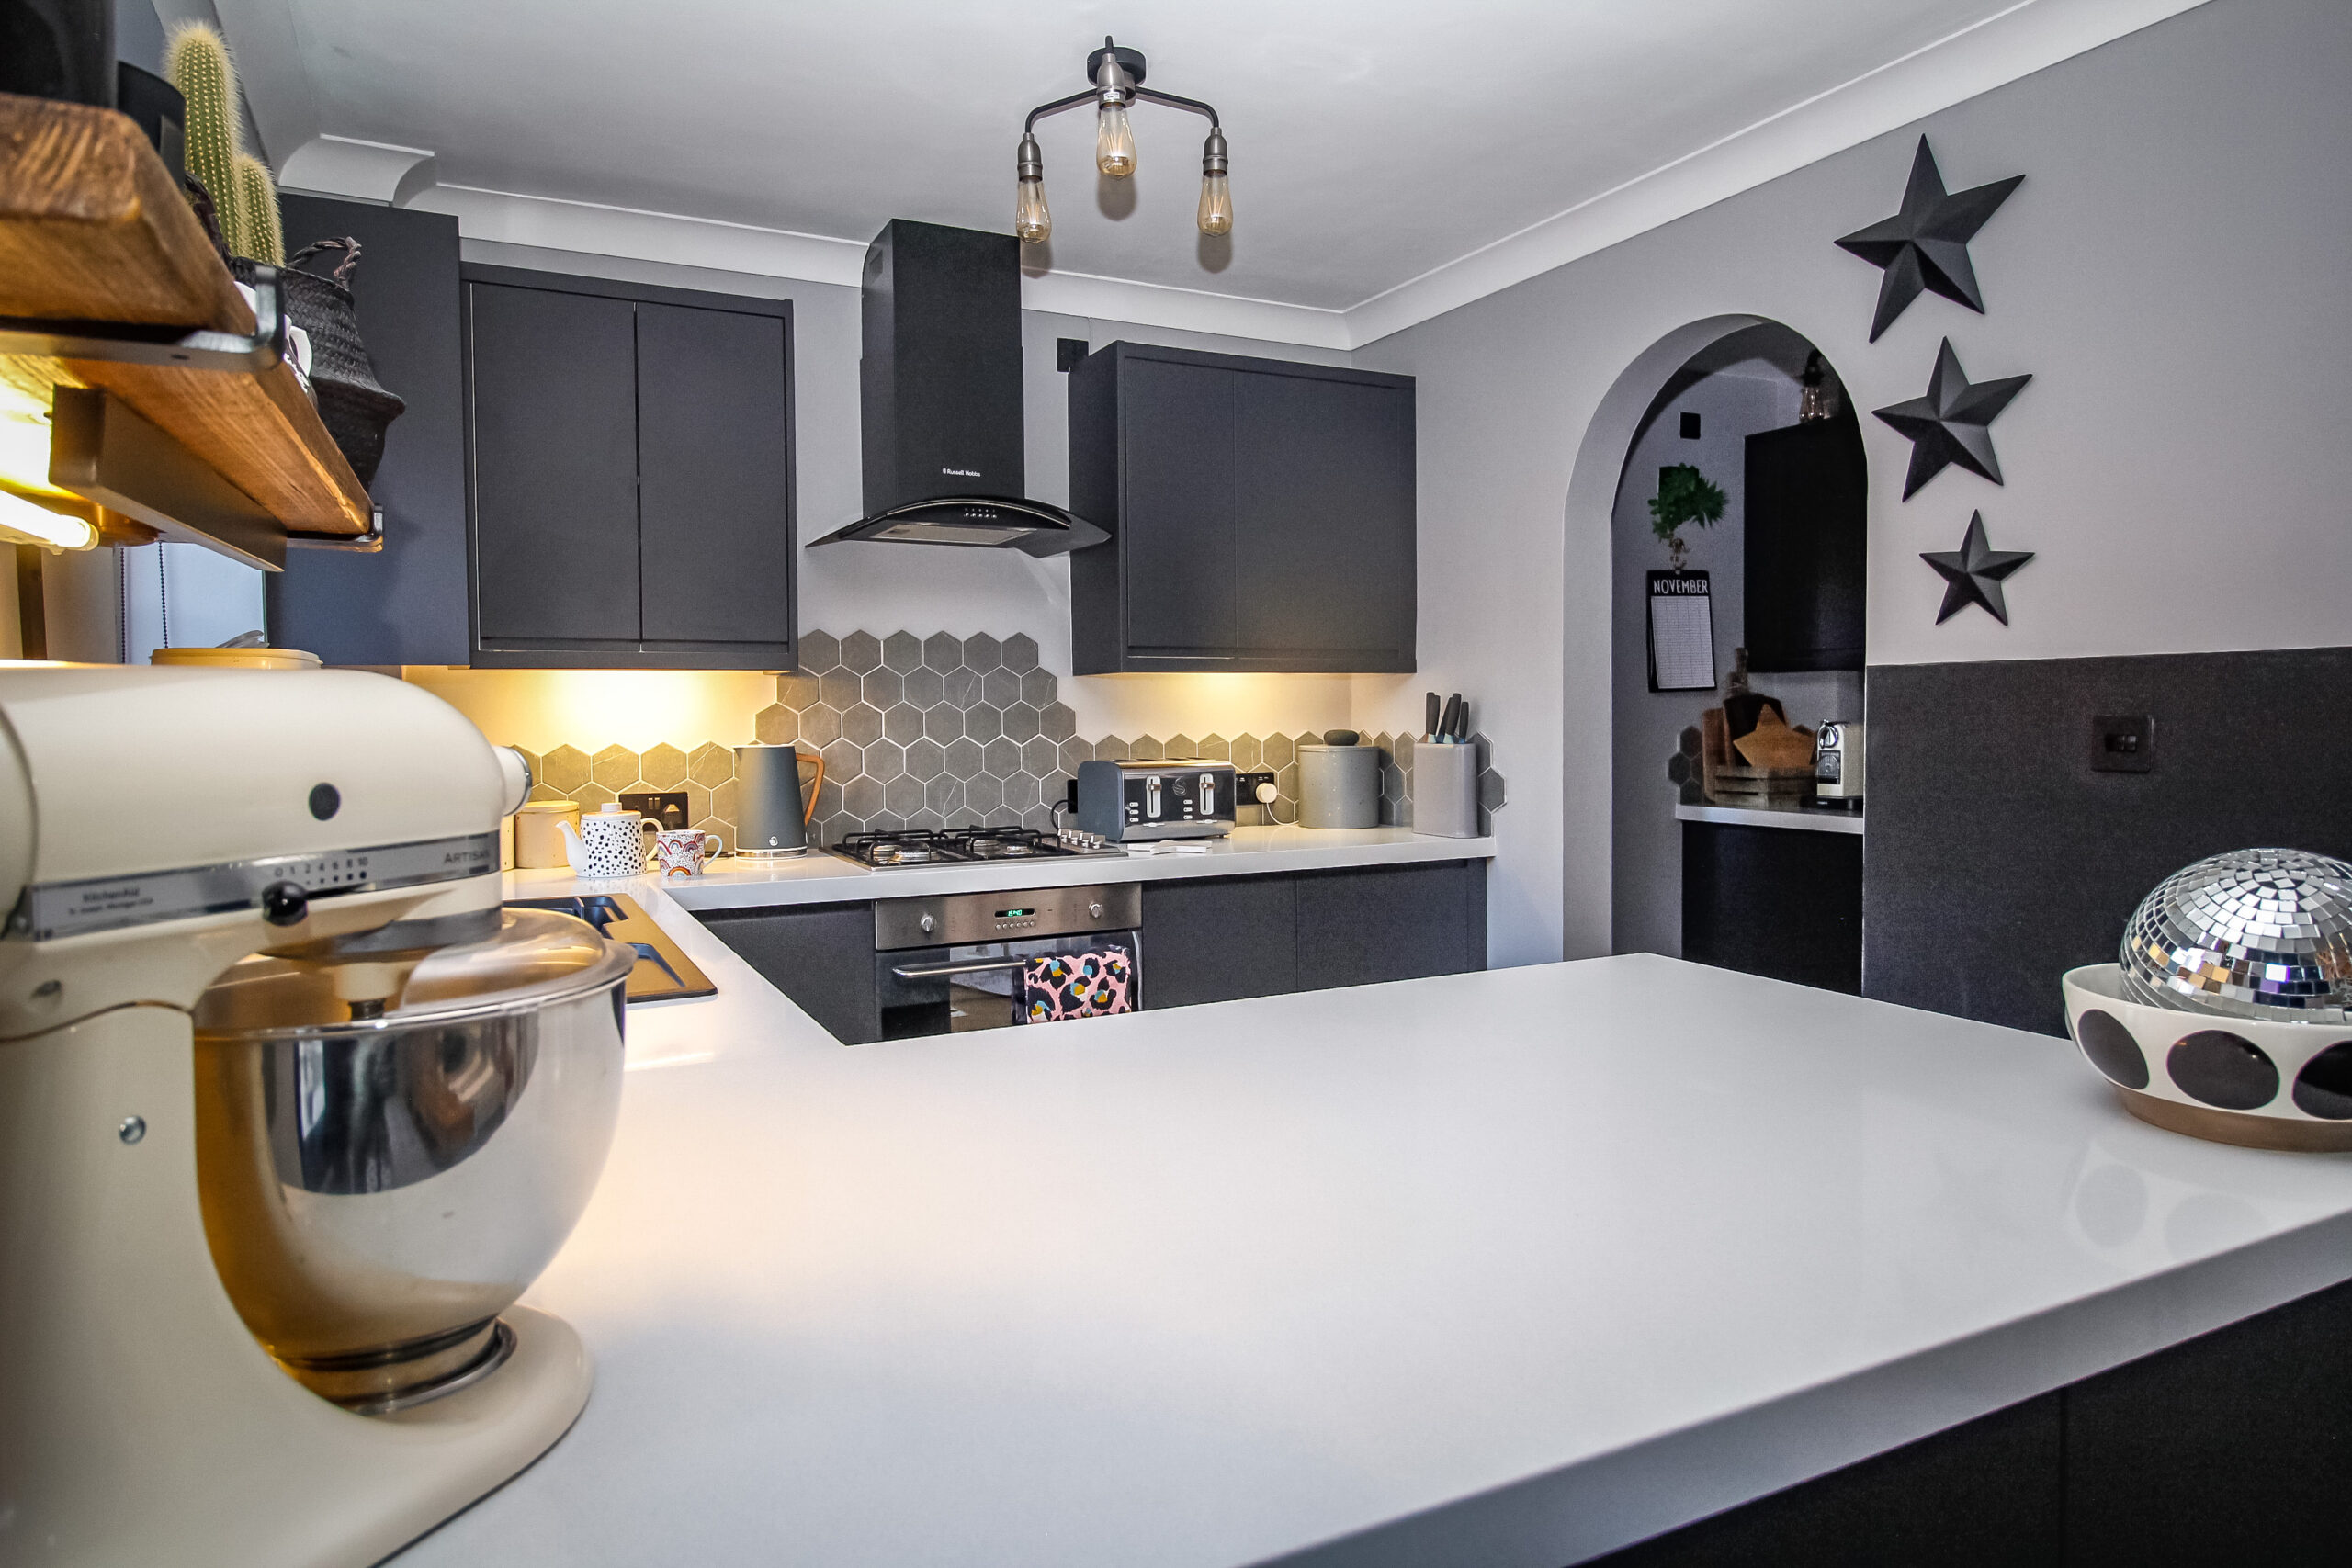 Why Choose Kitchen Worktops in Colchester for Your New Kitchen?